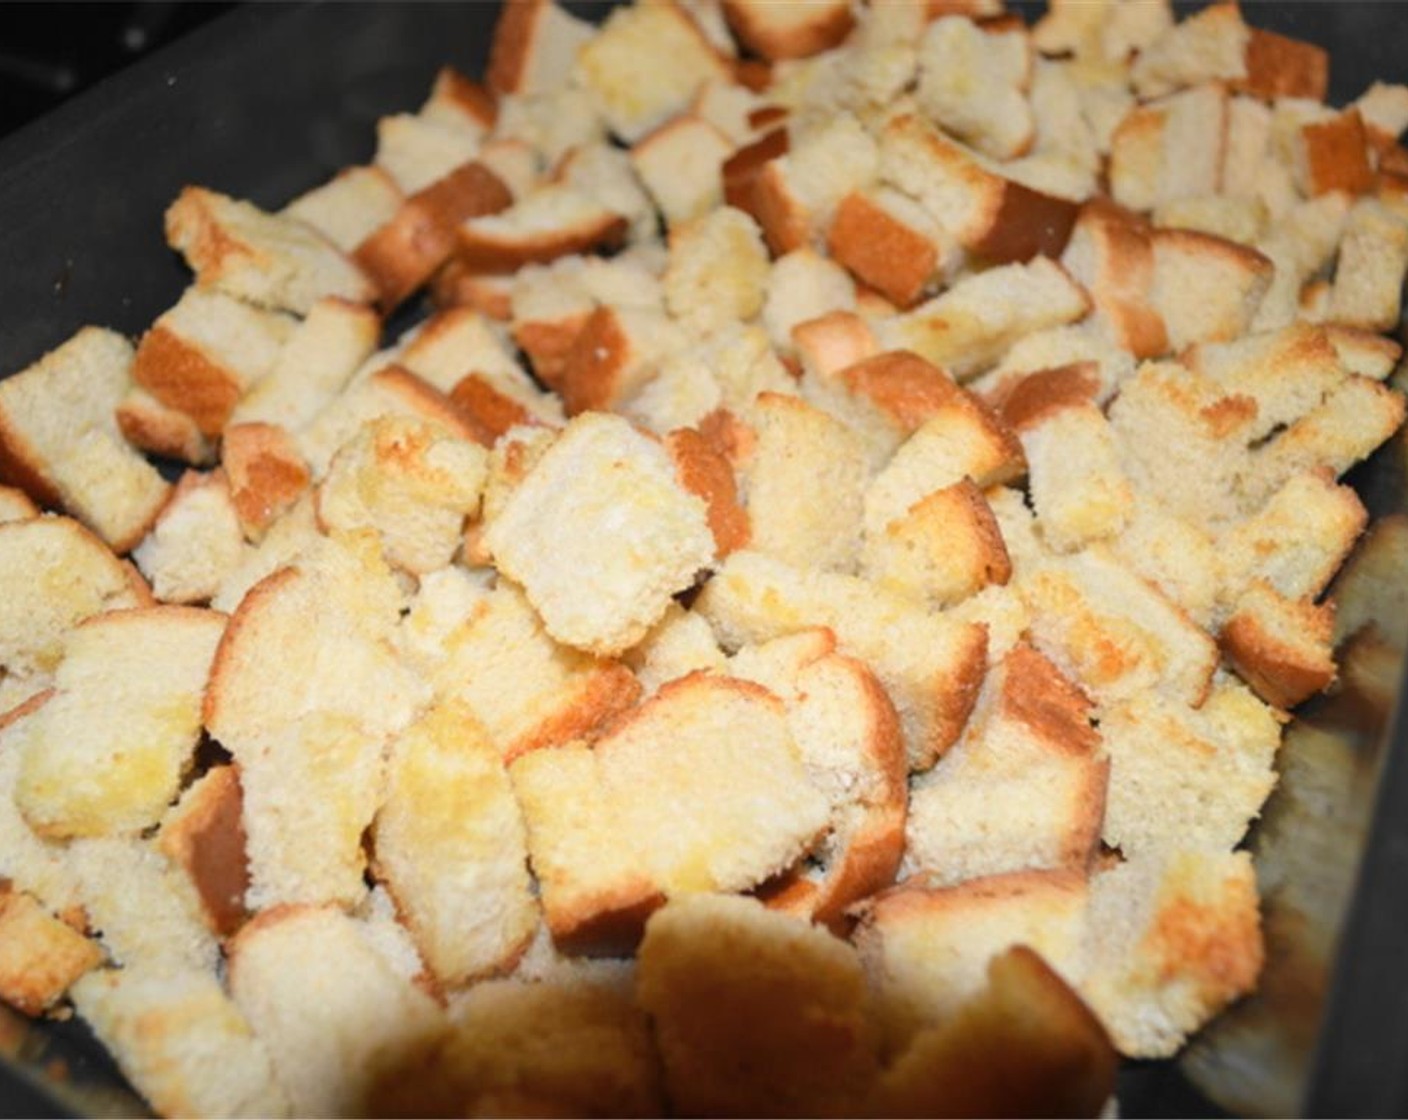 step 2 Get the cubes of White Bread (12 slices) into the pan and toss the cubes with the Extra-Virgin Olive Oil (3 Tbsp). Put the baking pan in the oven to crisp up for about 10 minutes. When it's done, take the pan out and set it aside.